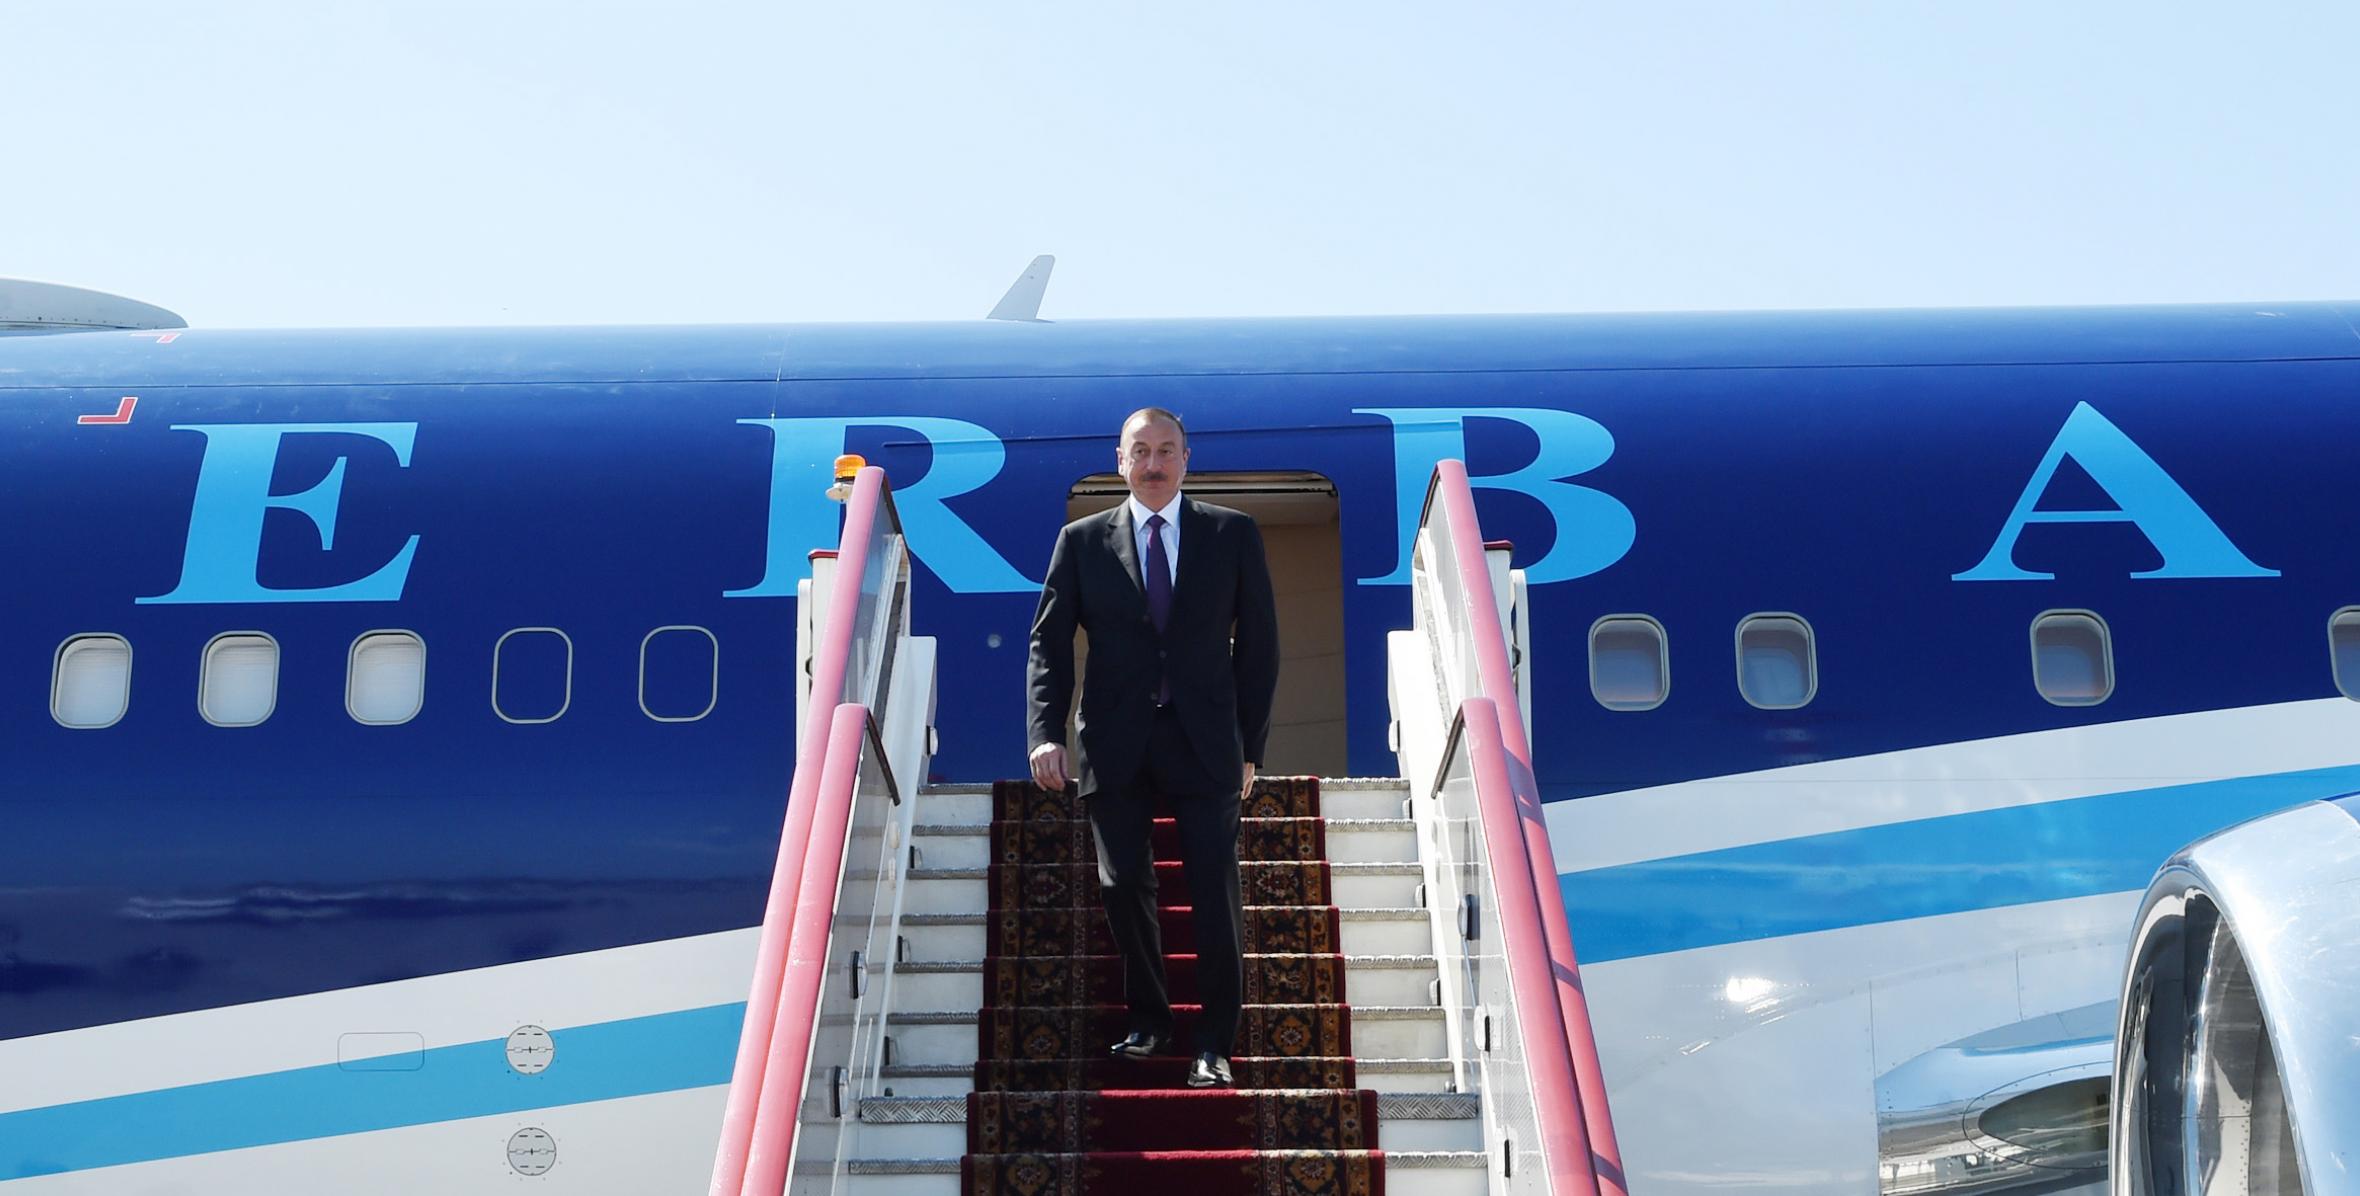 Ilham Aliyev arrived in Russia for a working visit